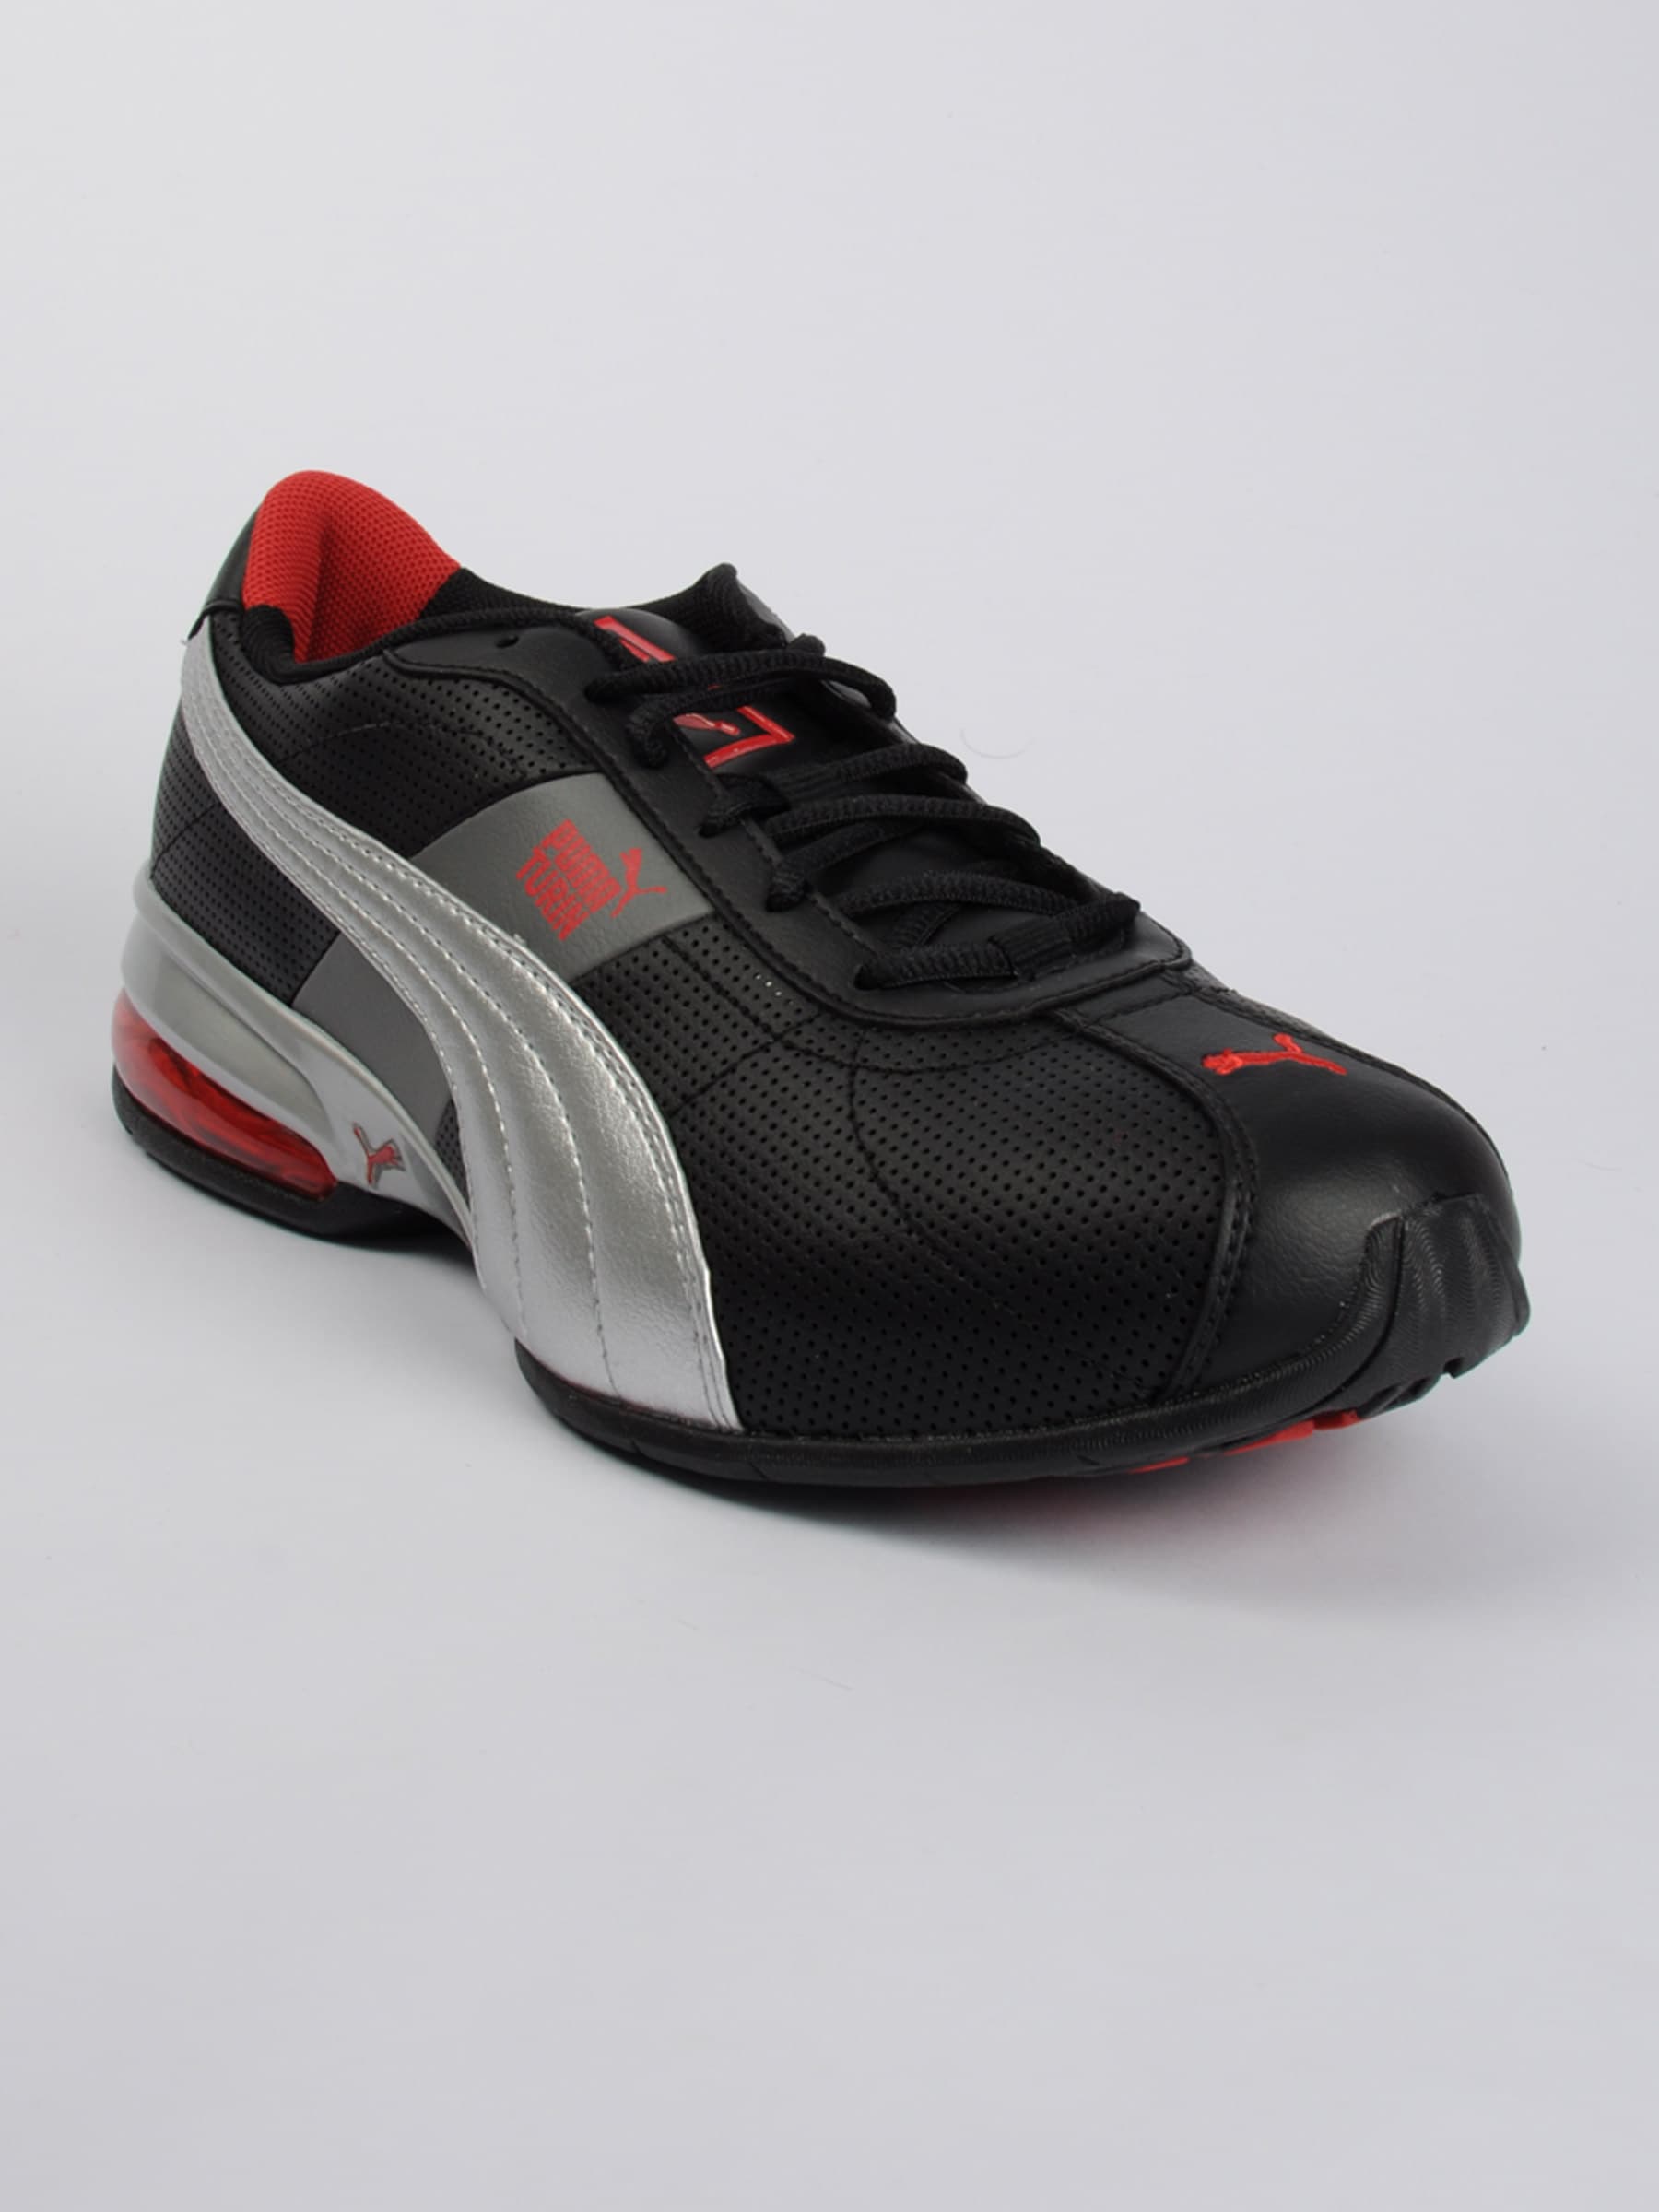 Puma Men Cell Turin Perf Black Sports Shoes